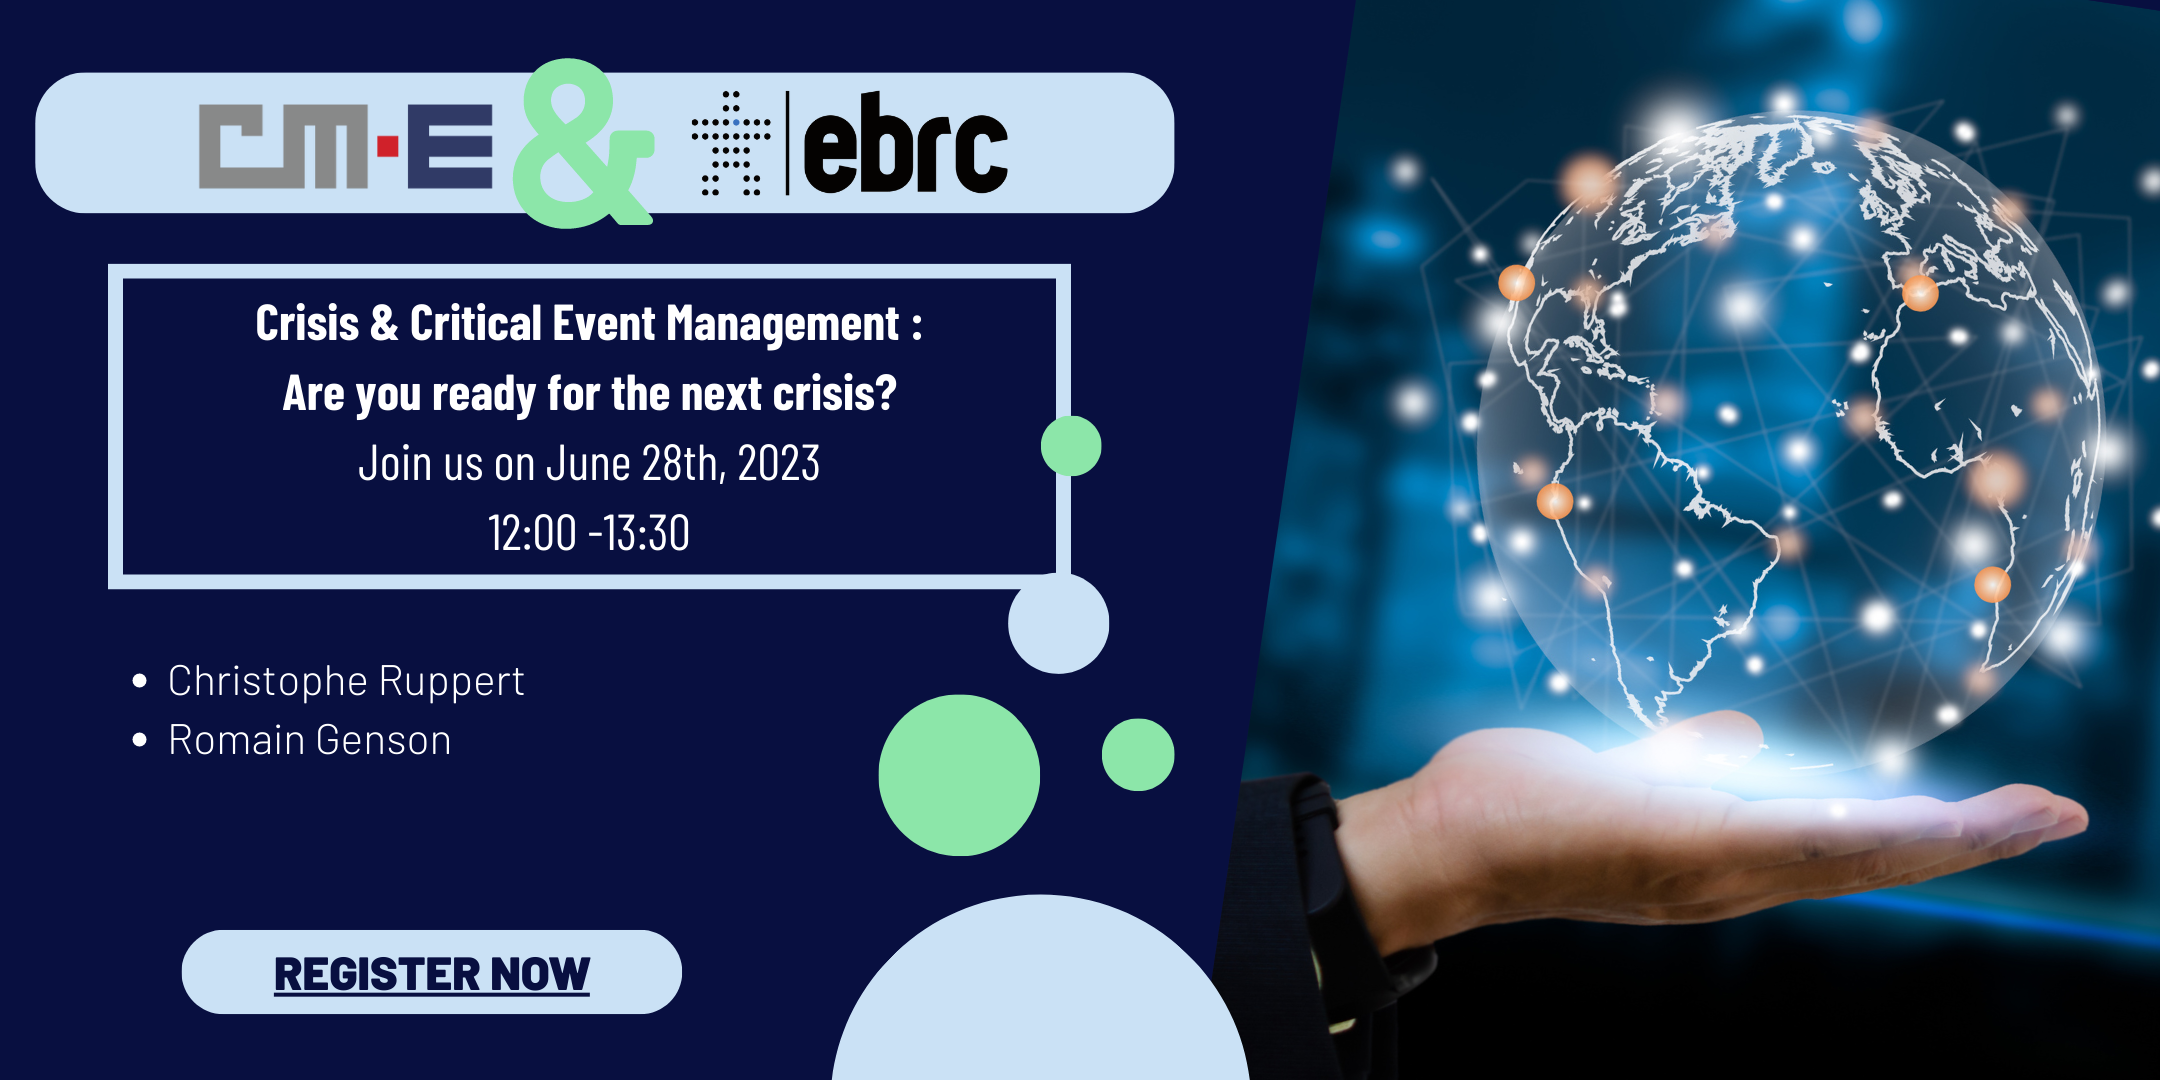 Crisis & Critical Event Management: are you ready for the next crisis?